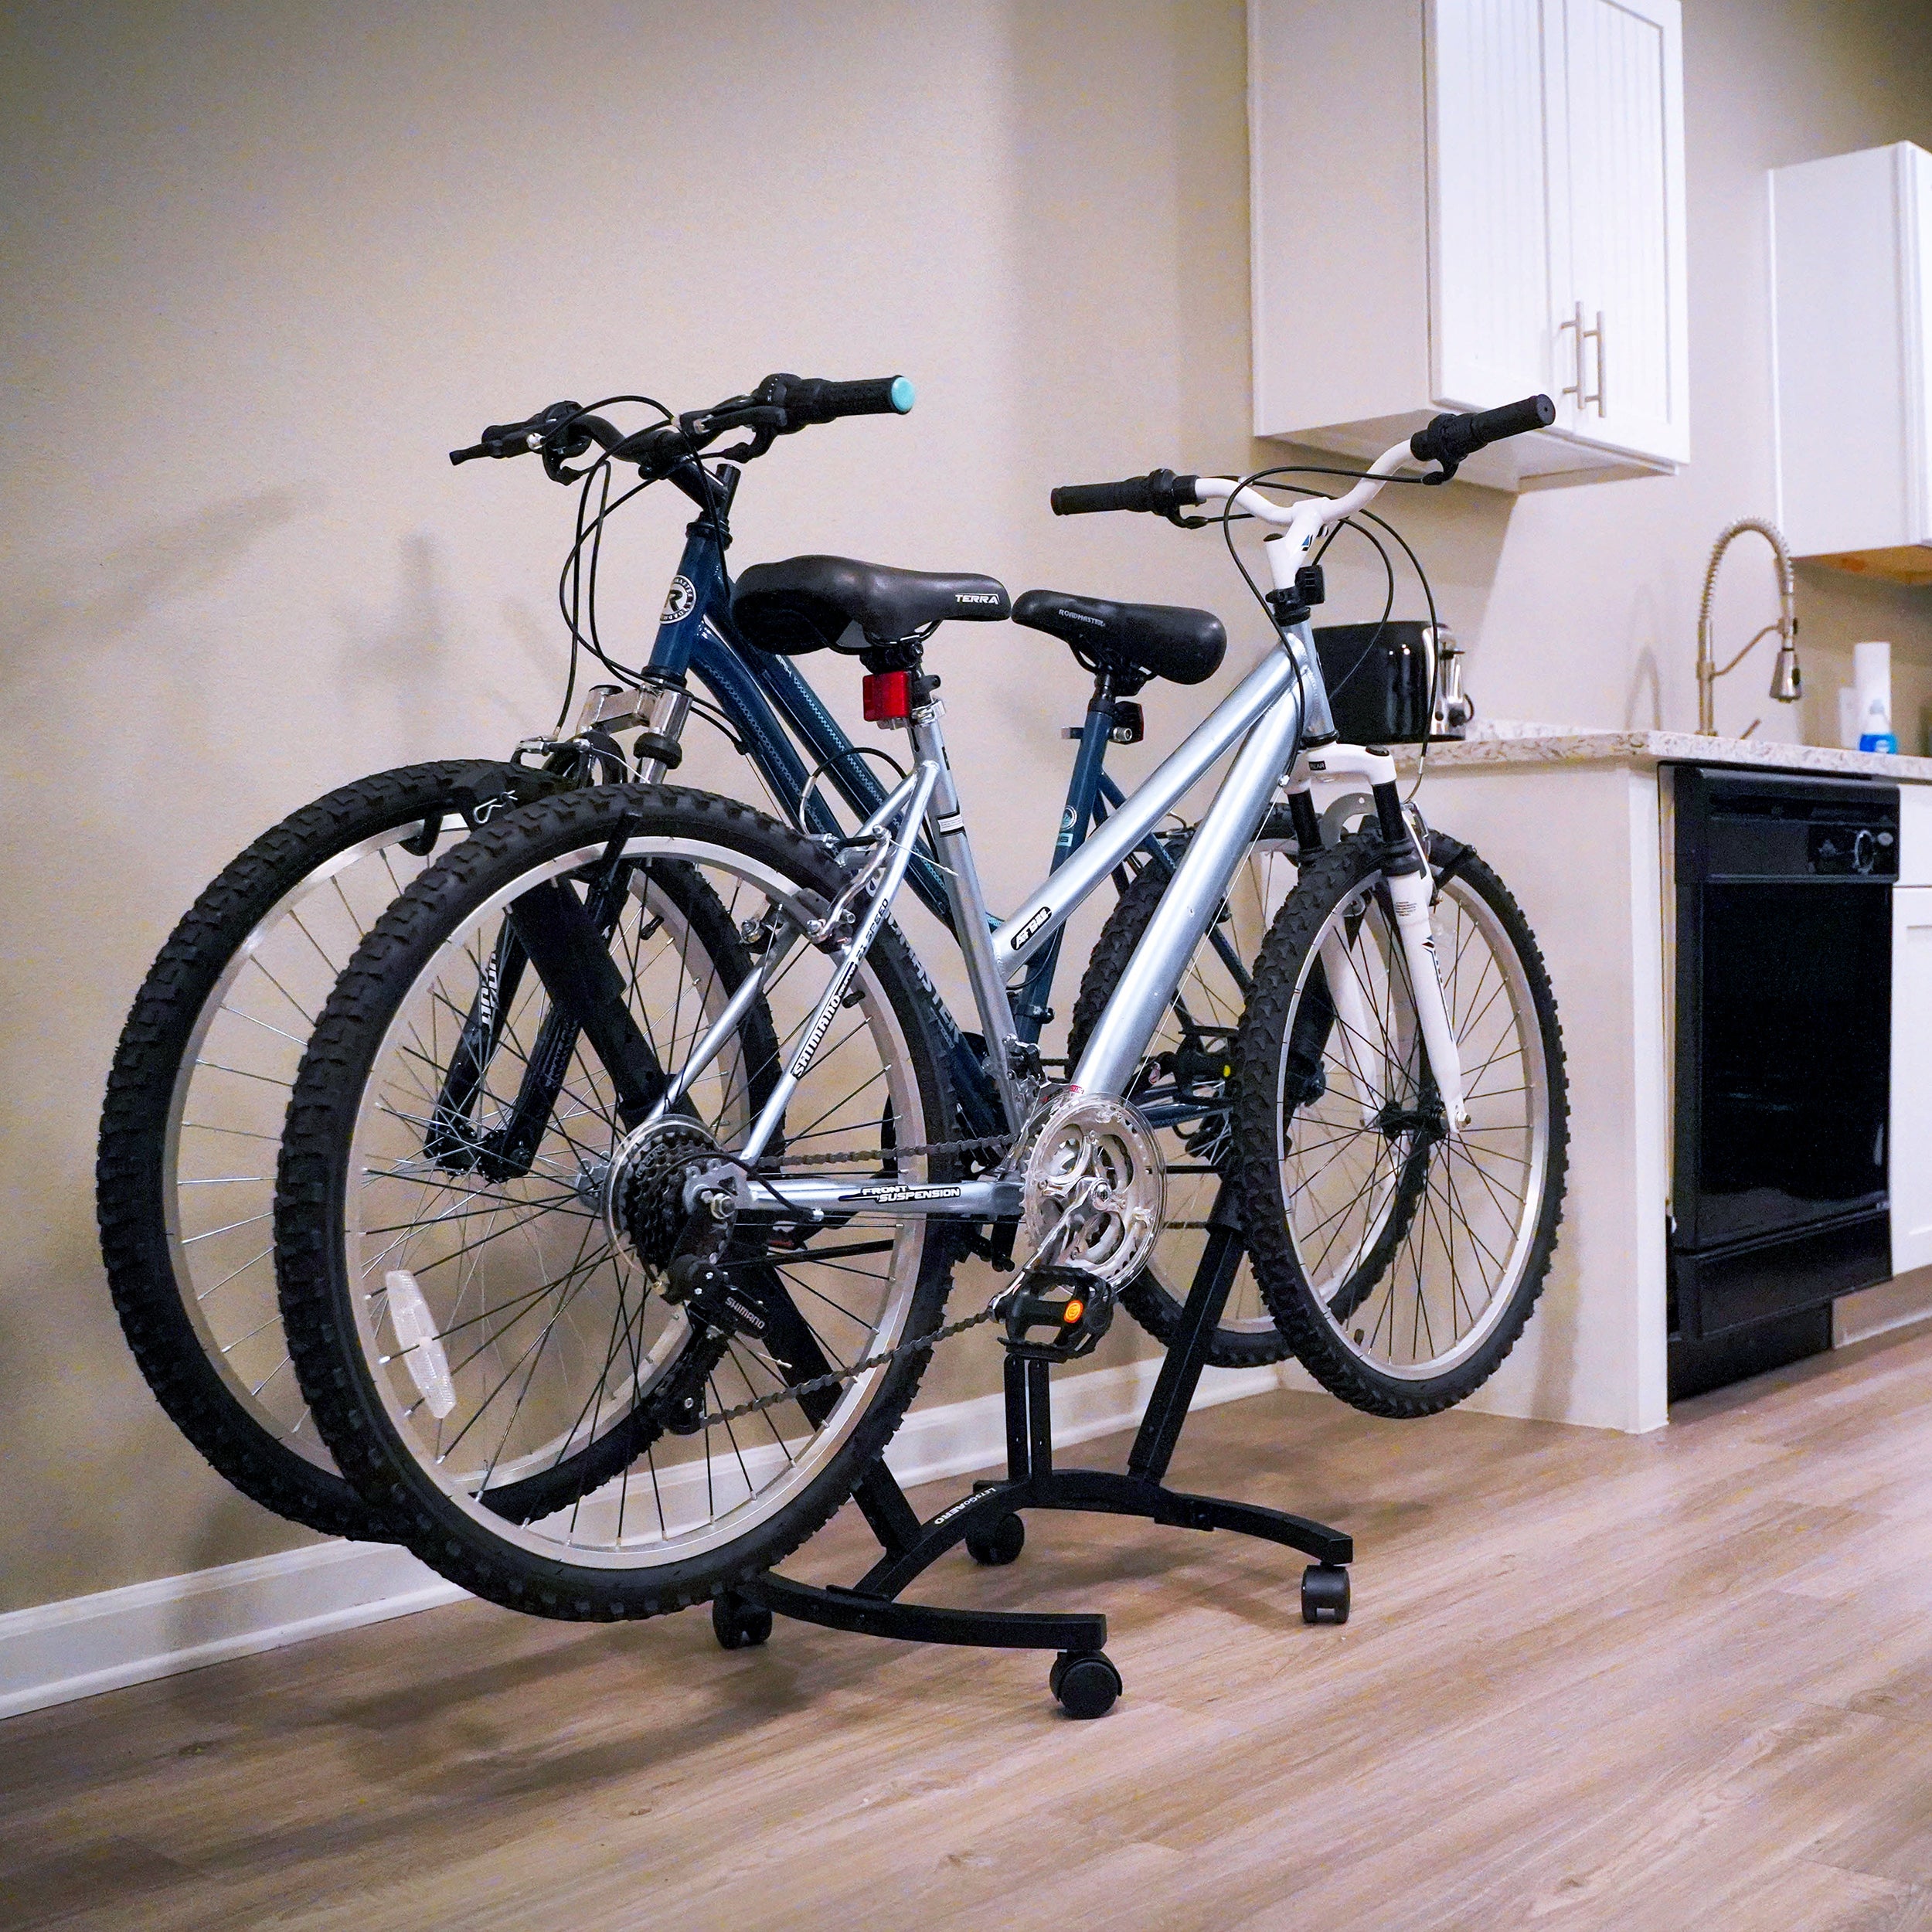 Introducing V-Tree Mobile Bicycle Storage Stands for Home, Garage